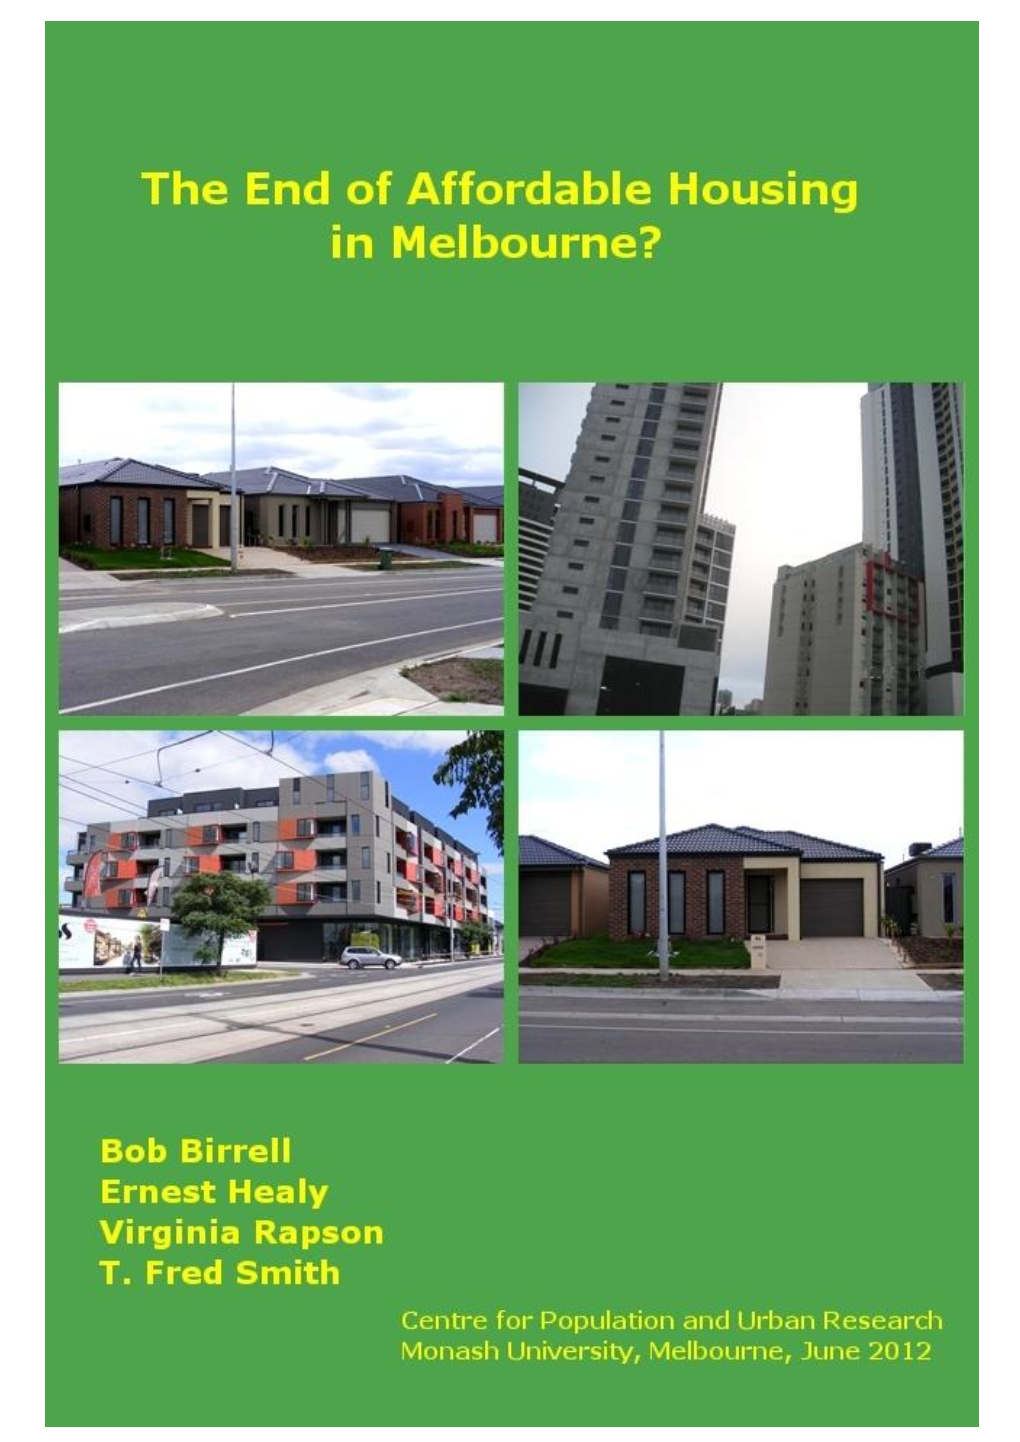 The End of Affordable Housing in Melbourne?